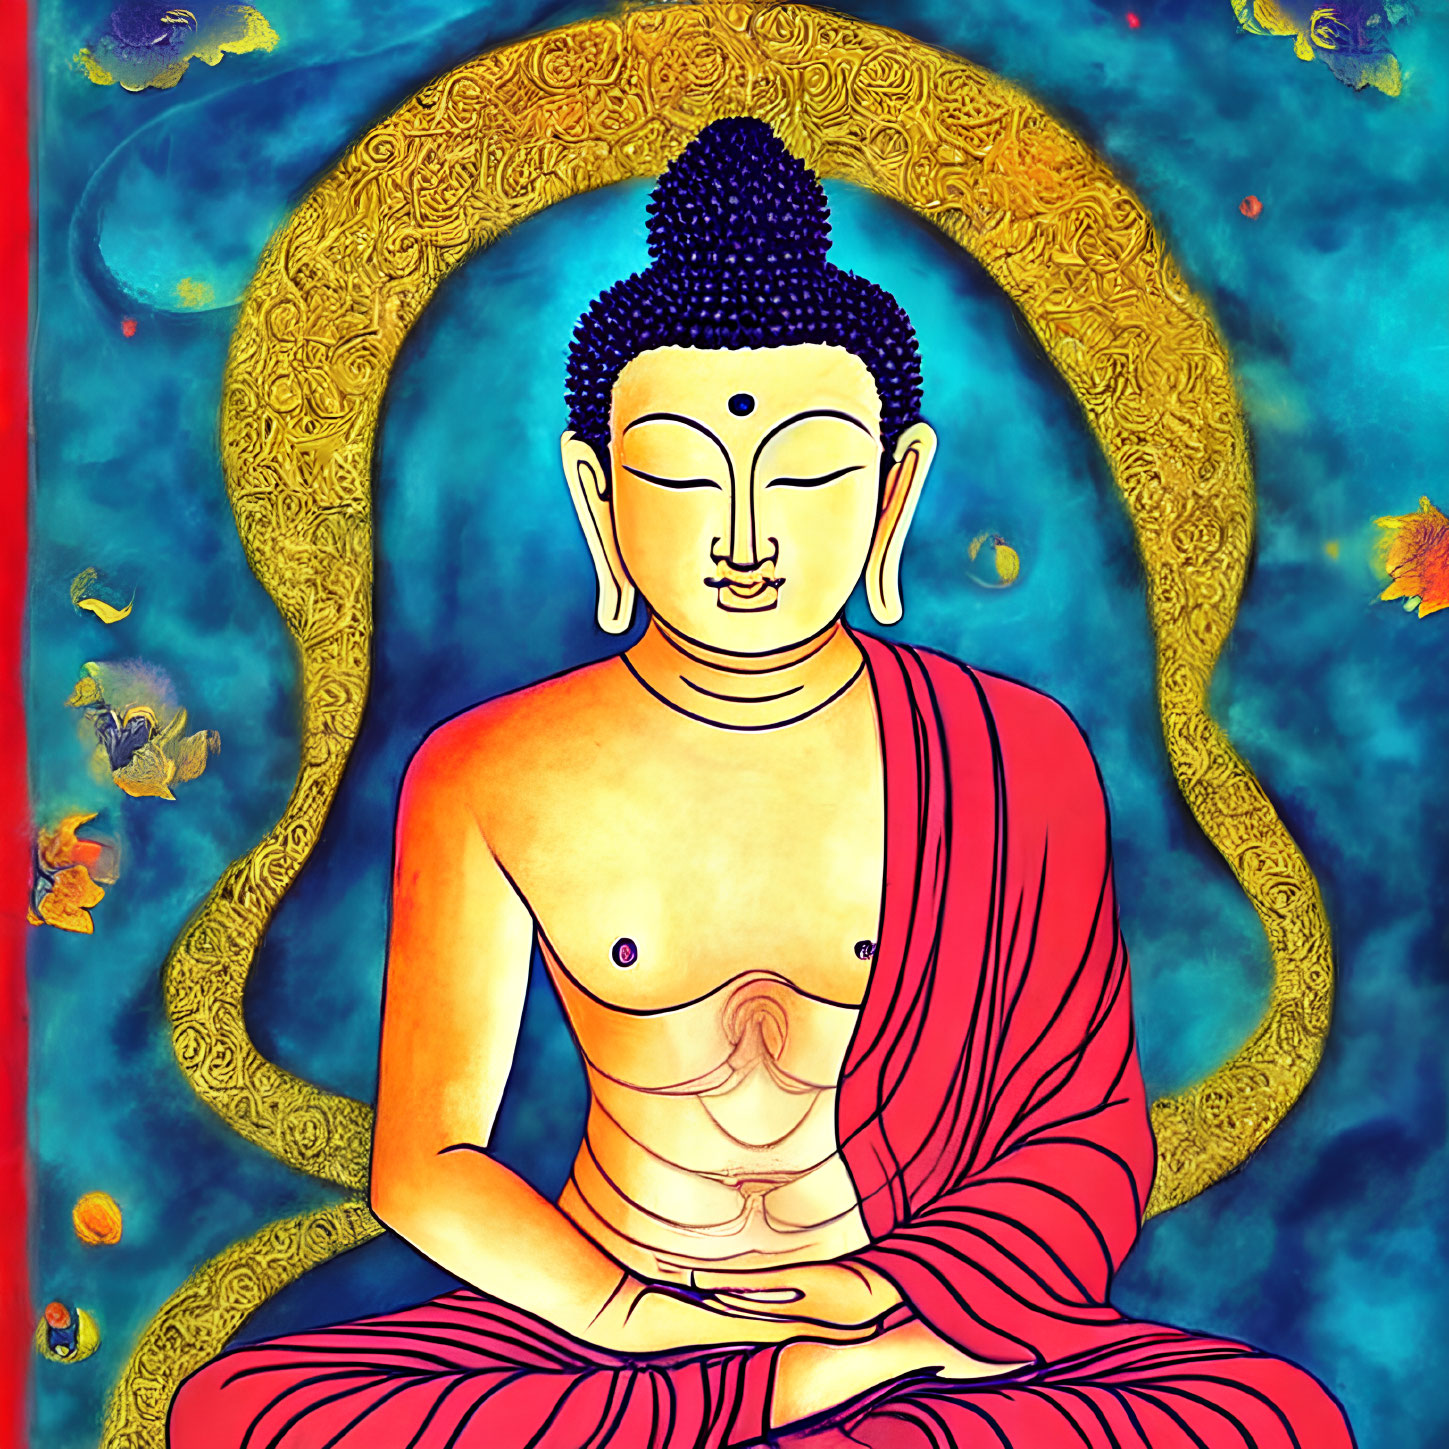 Meditating Buddha in Red Robe with Blue and Gold Aura surrounded by Floating Leaves in Starry